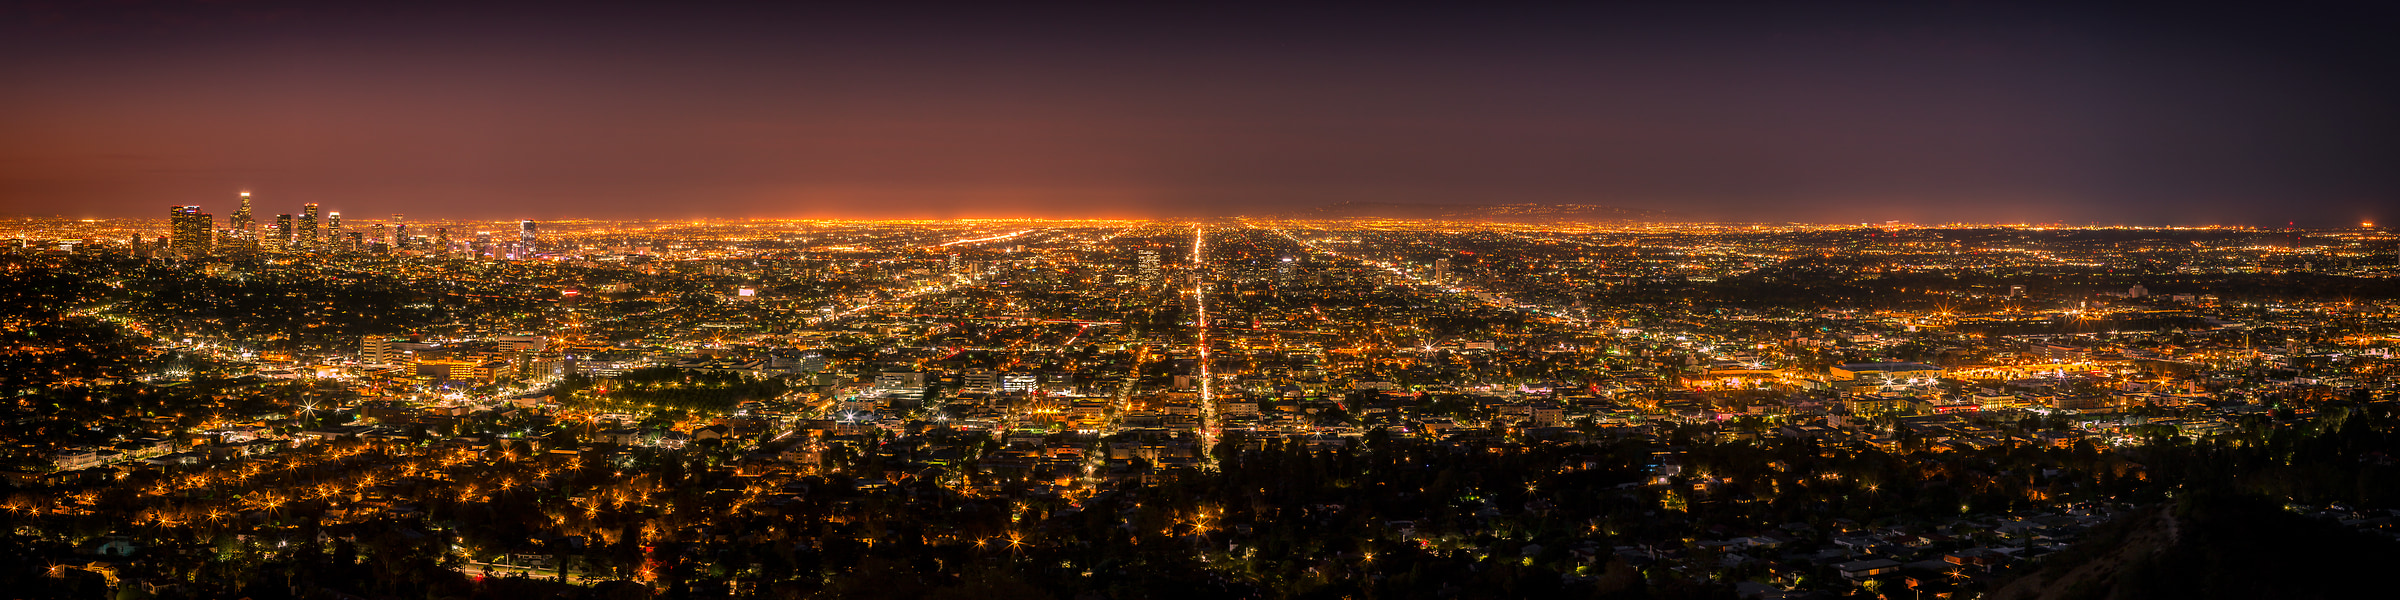 114 megapixels! A very high resolution, large-format VAST photo print of the Los Angeles and Hollywood skyline in California at sunrise and sunset; landscape photo created by cityscape photographer Guido Brandt